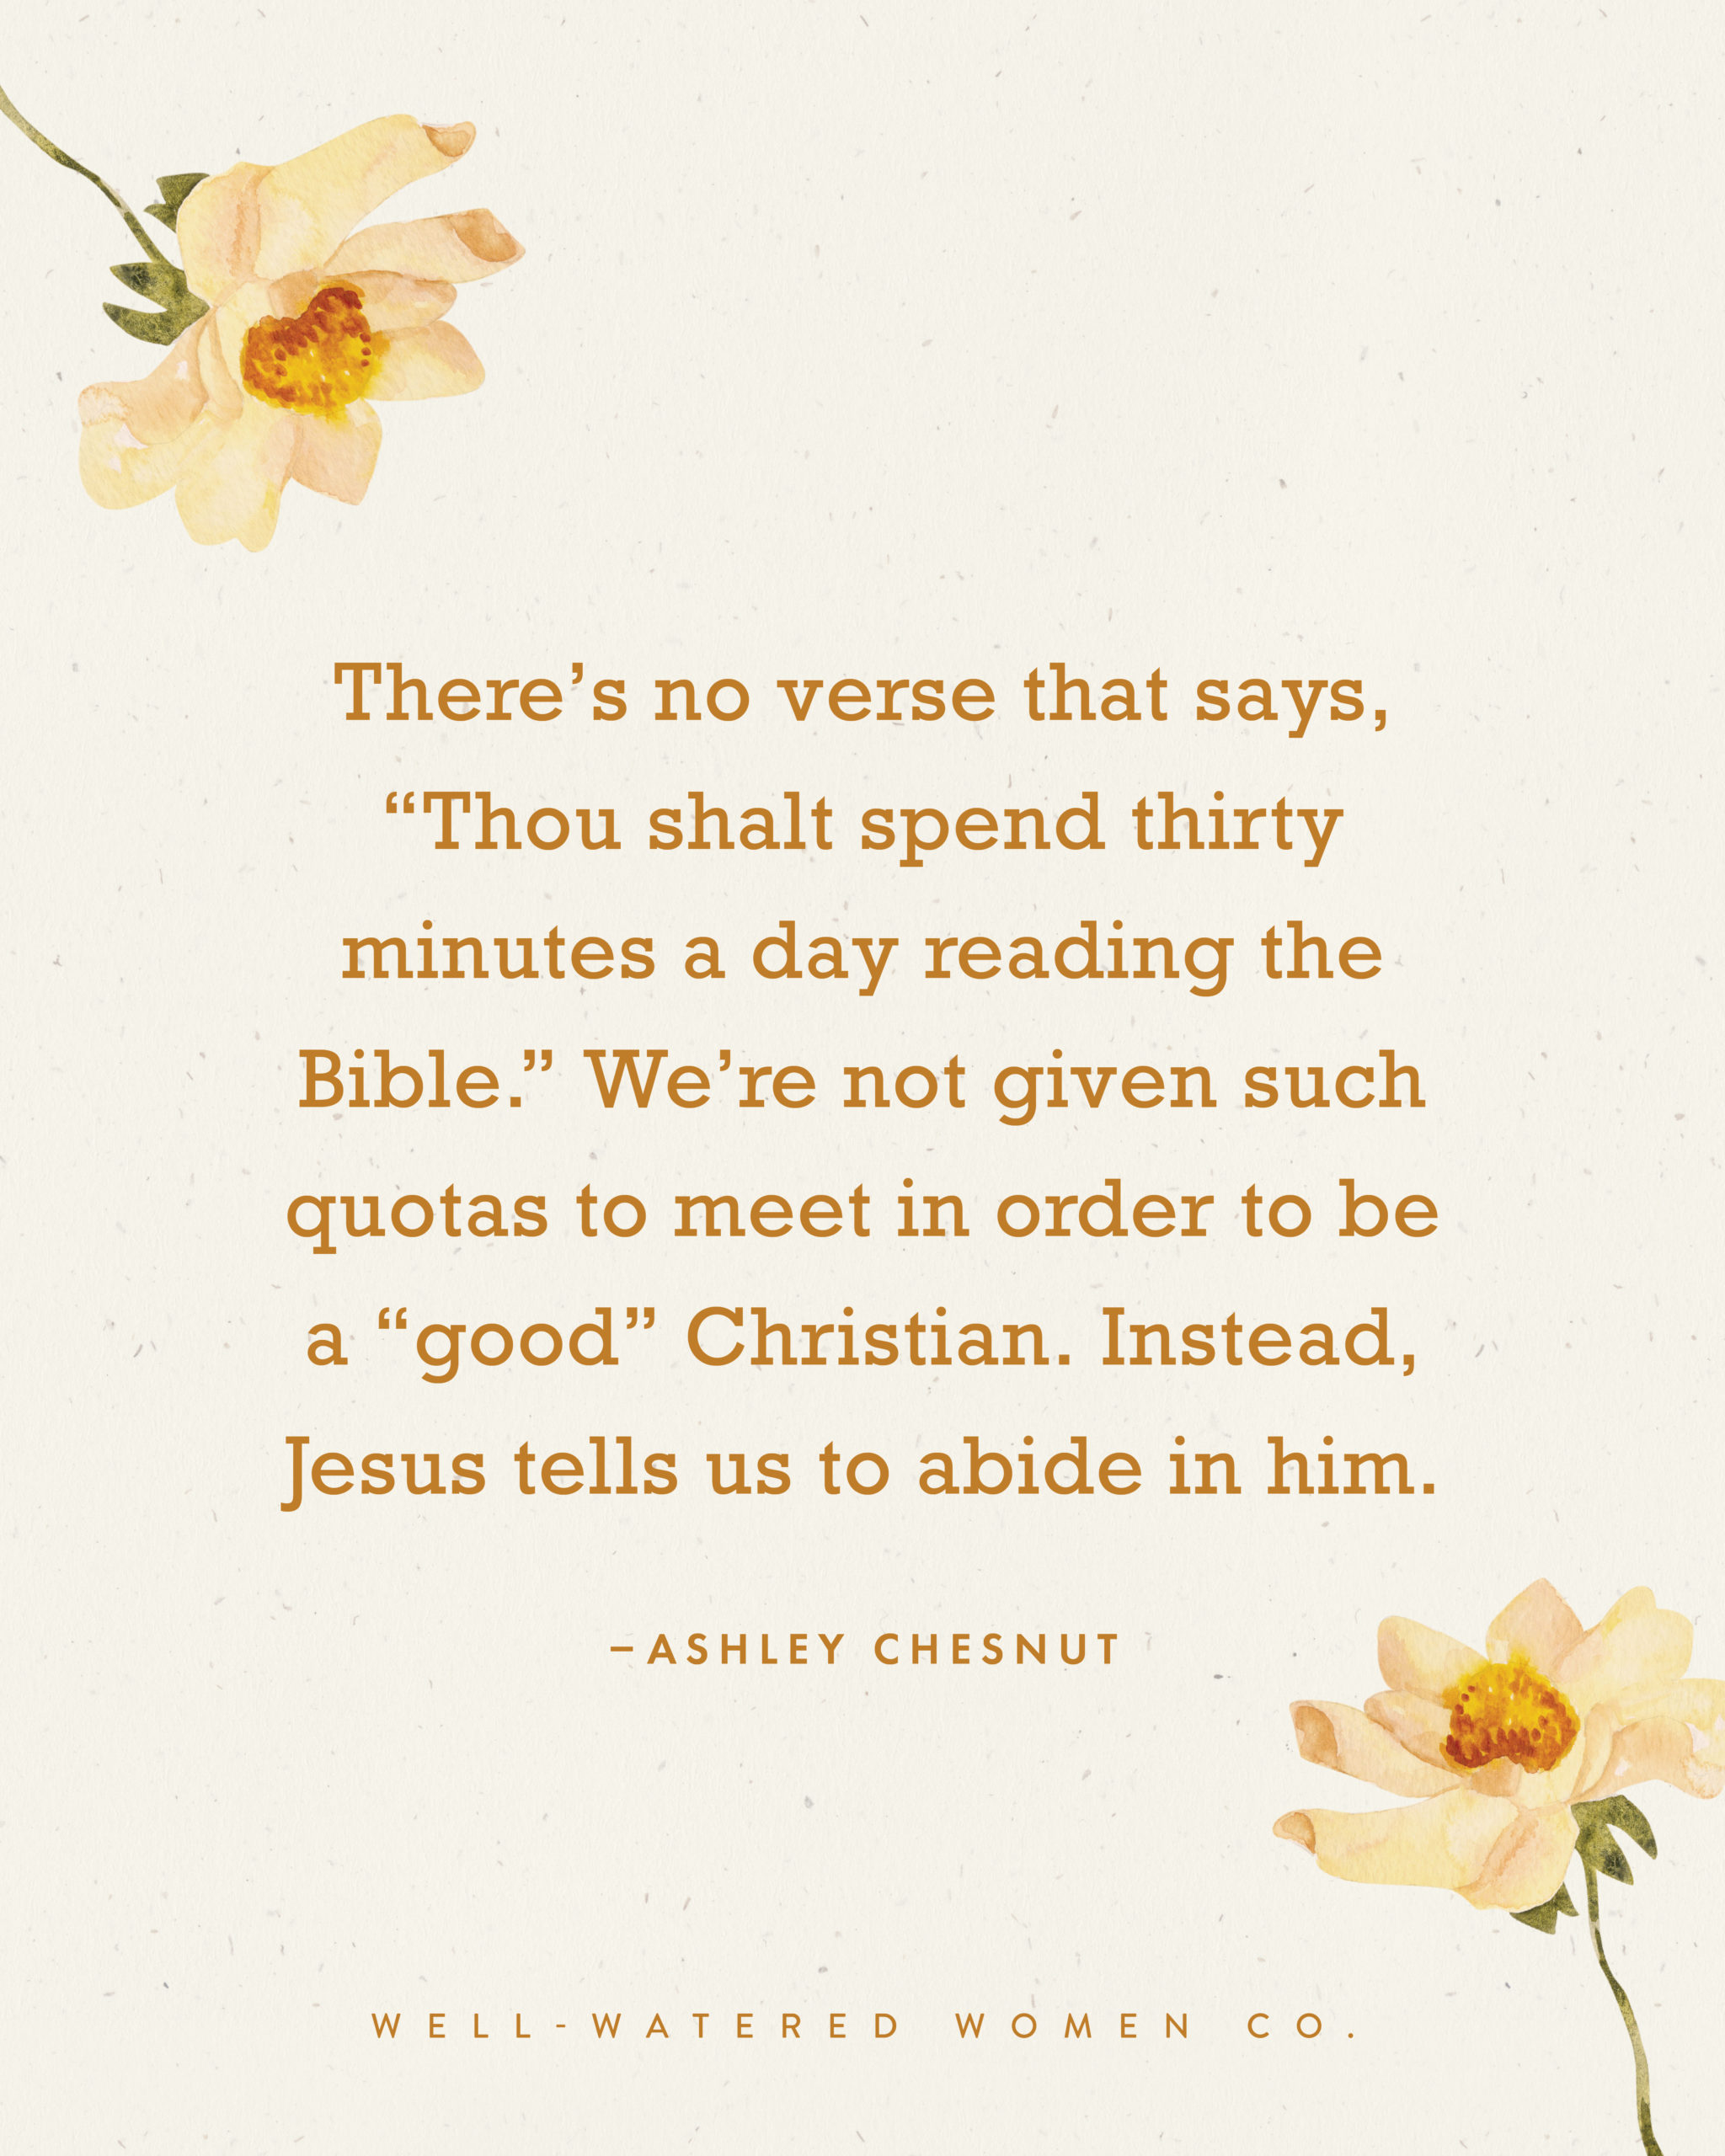 How Often Should I Study the Bible? - an article by Well-Watered Women - quote